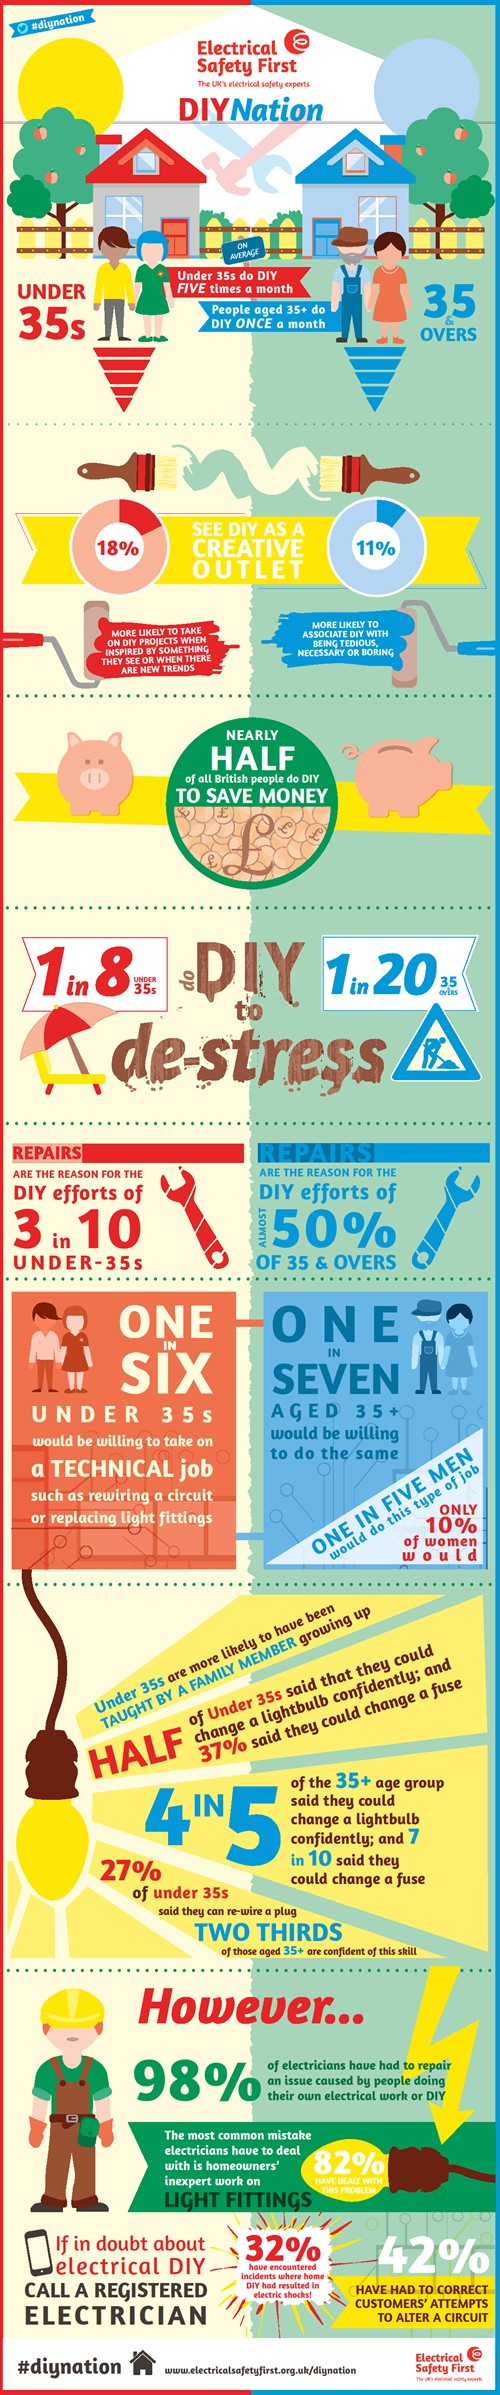 Graphic via Infographic: DIY Nation, Electrical Safety First.